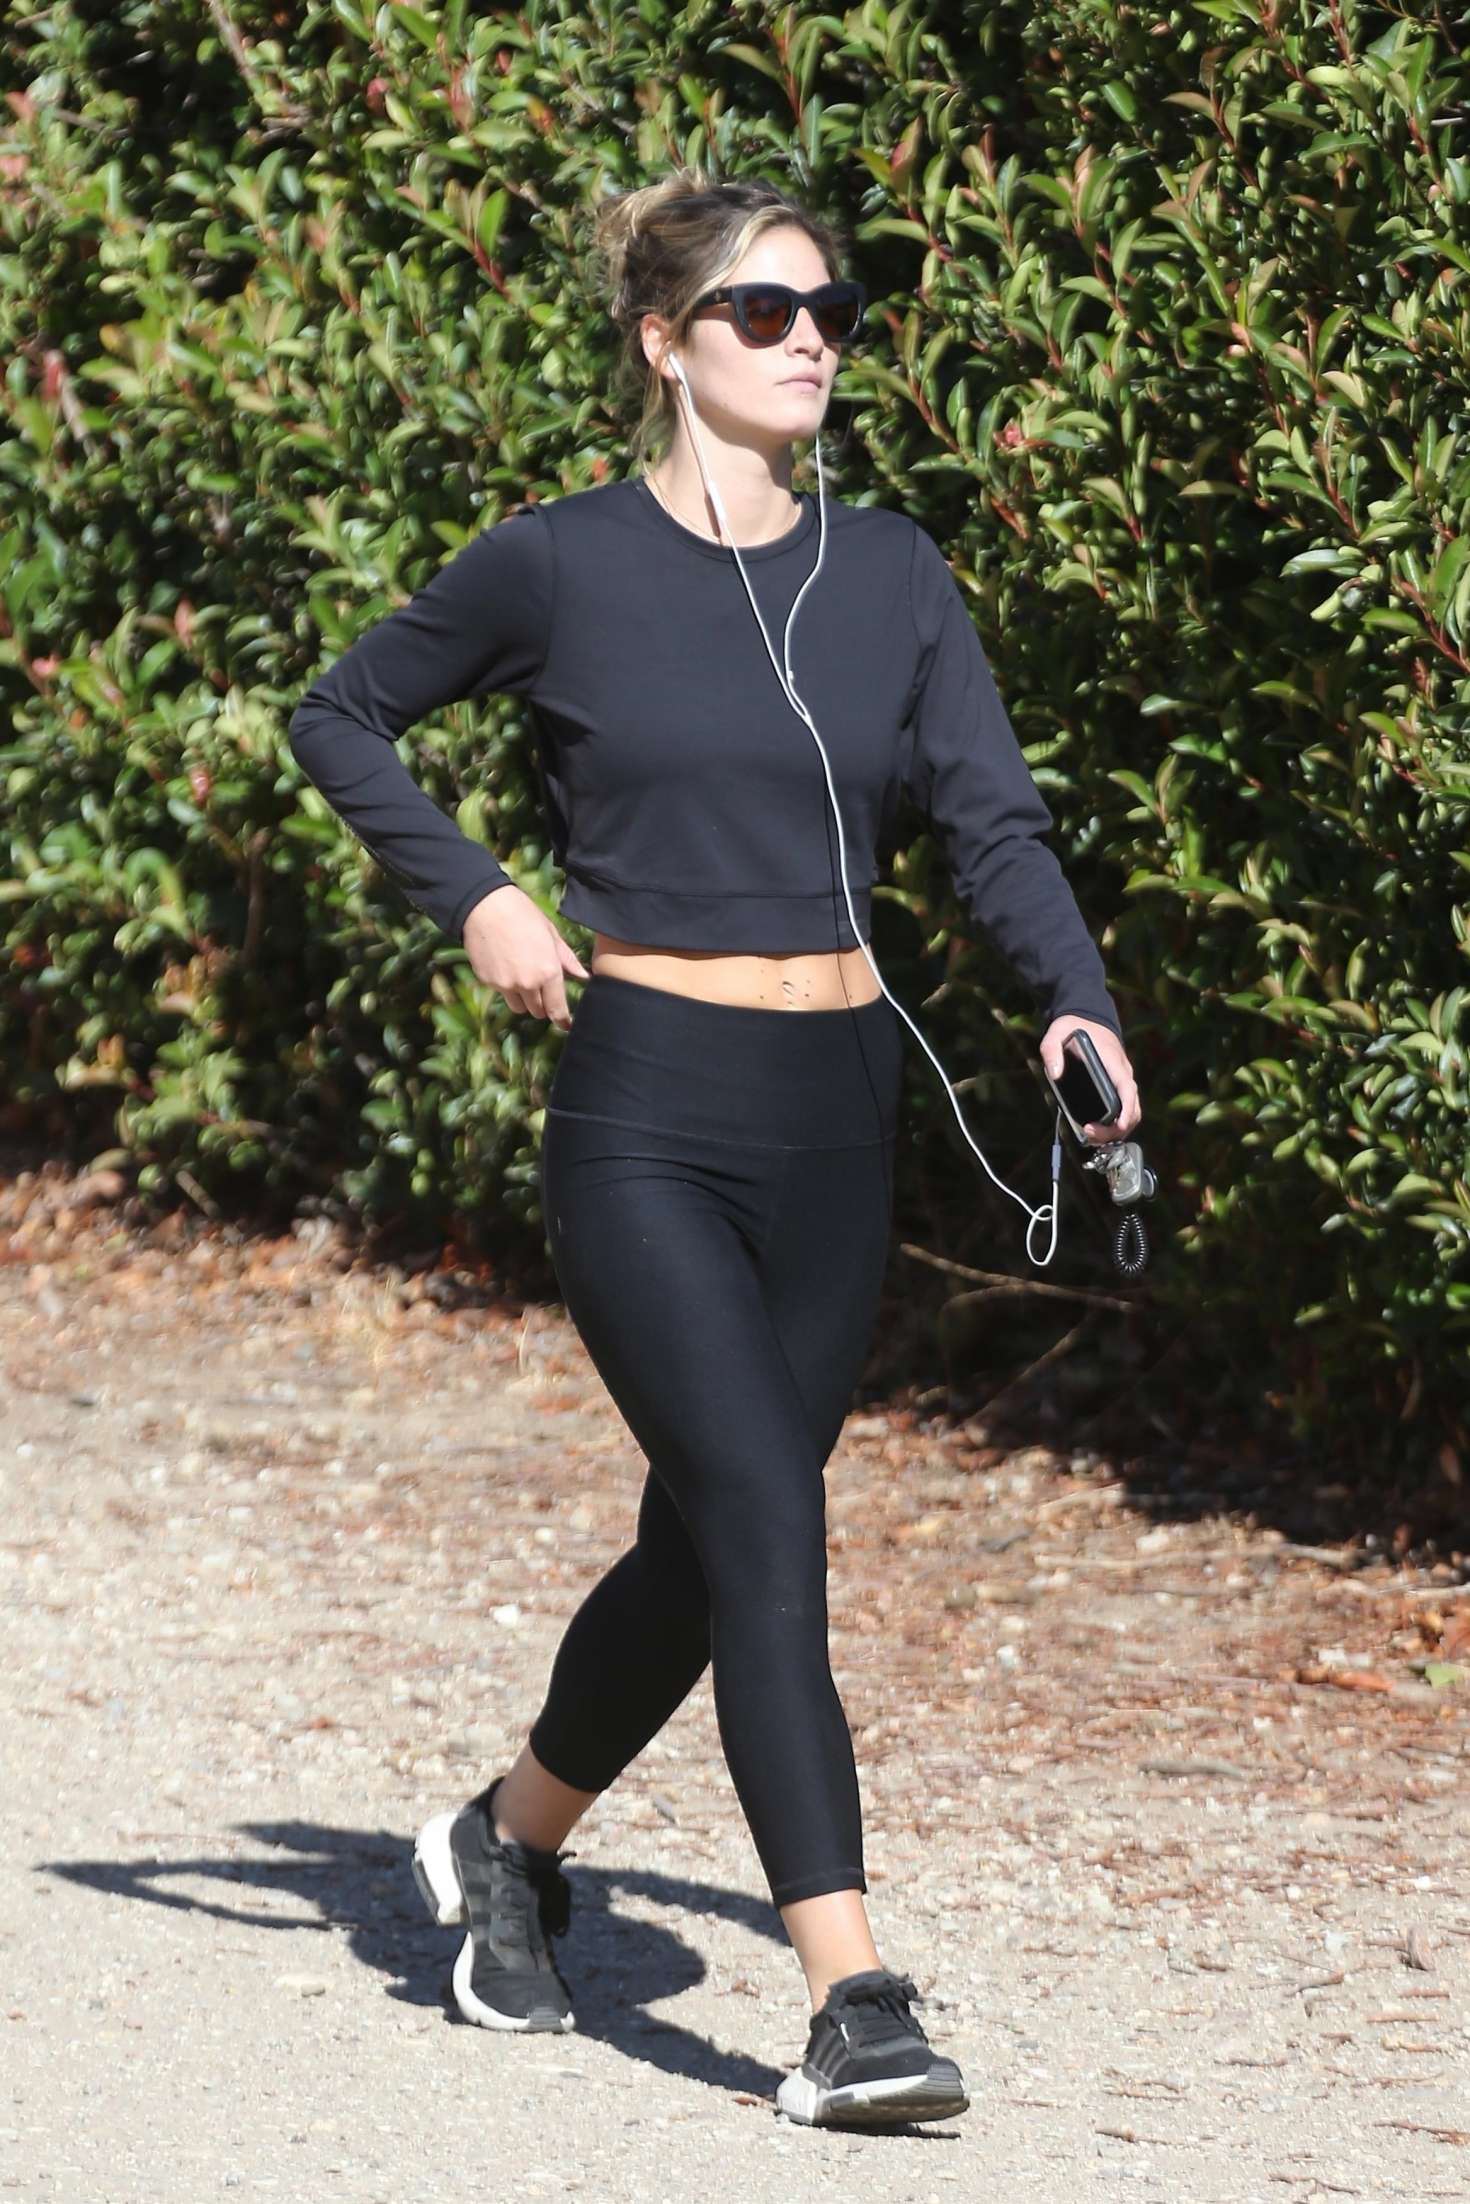 Shauna Sexton in Leggings â€“ Out for a hike in Los Angeles